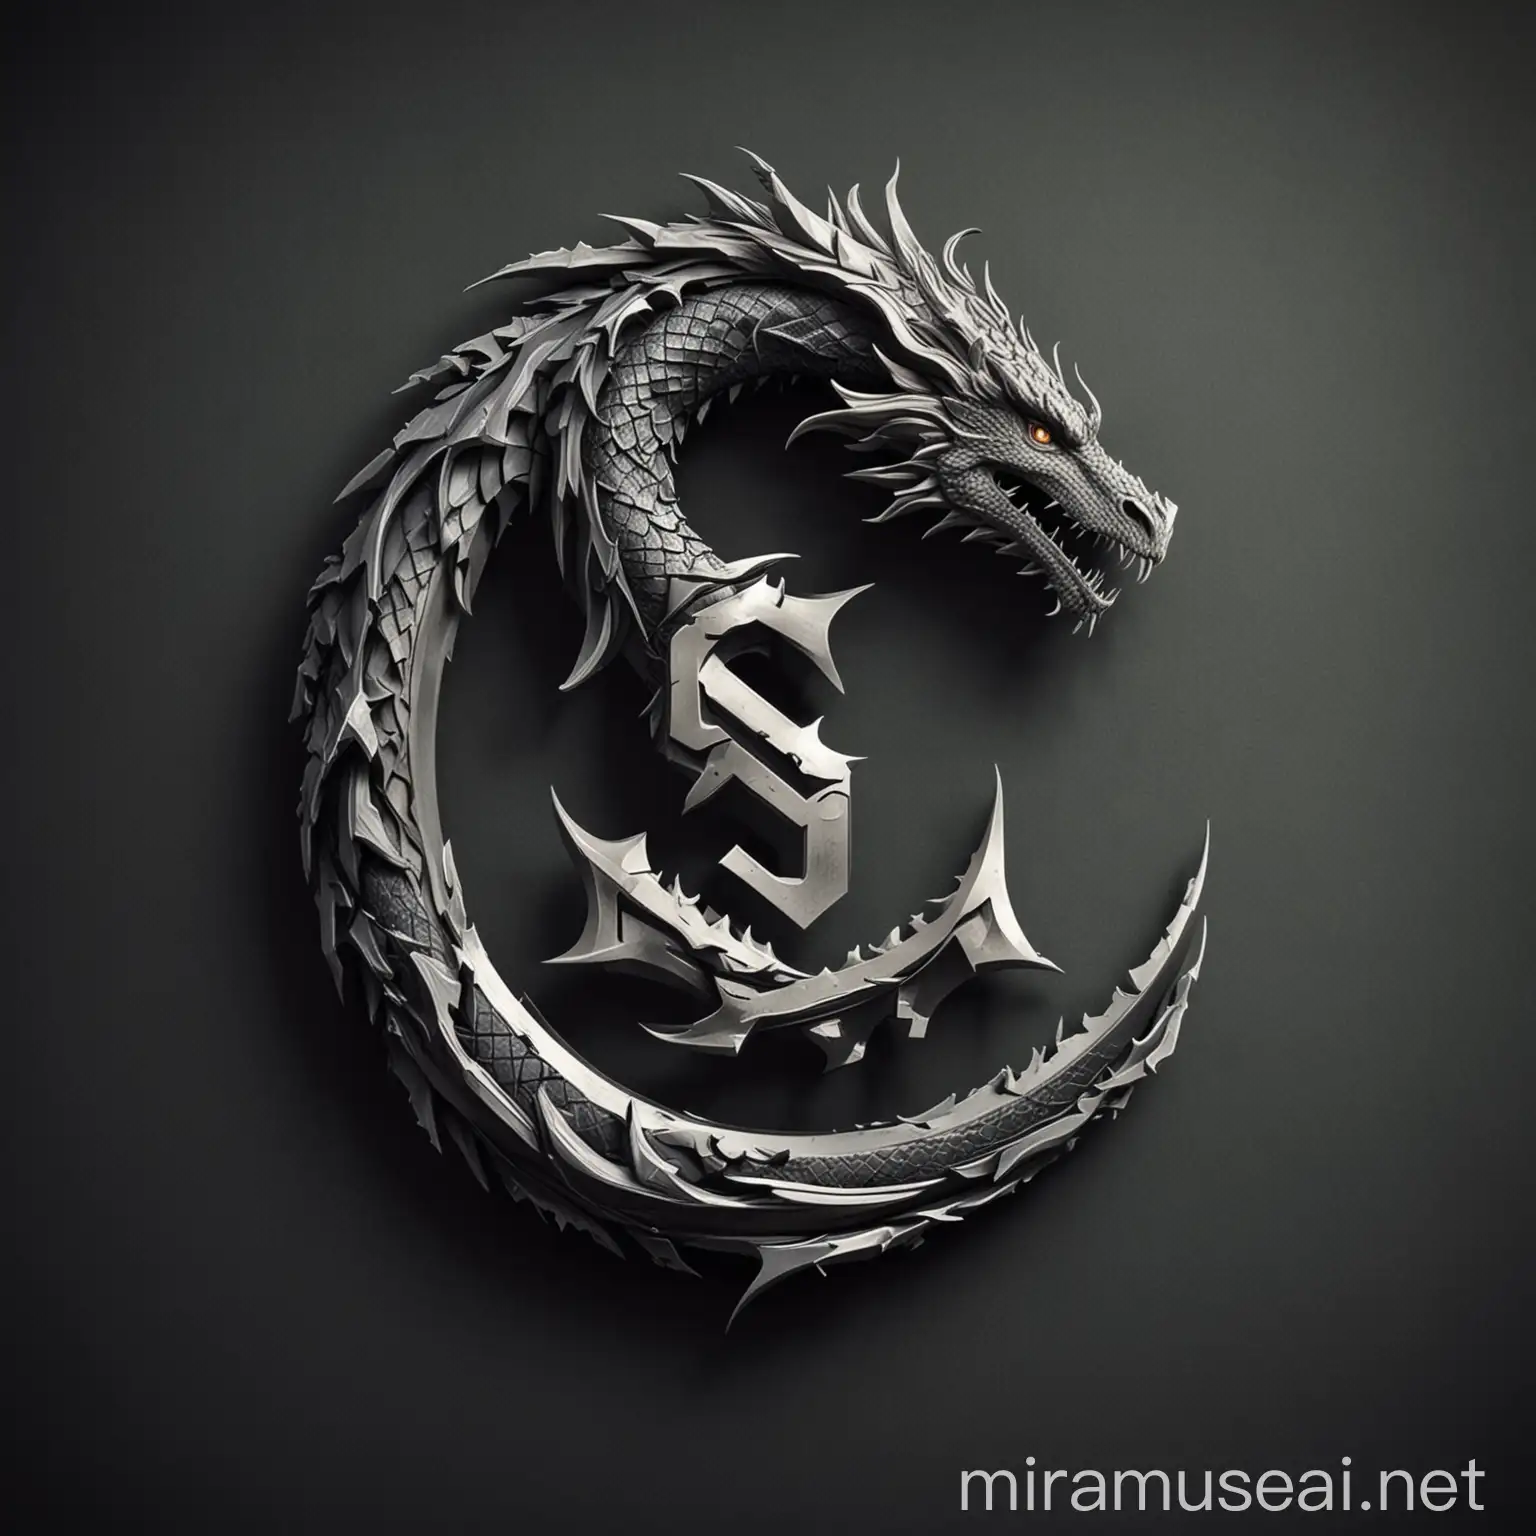 Big letter S logo form like a dragon with swords